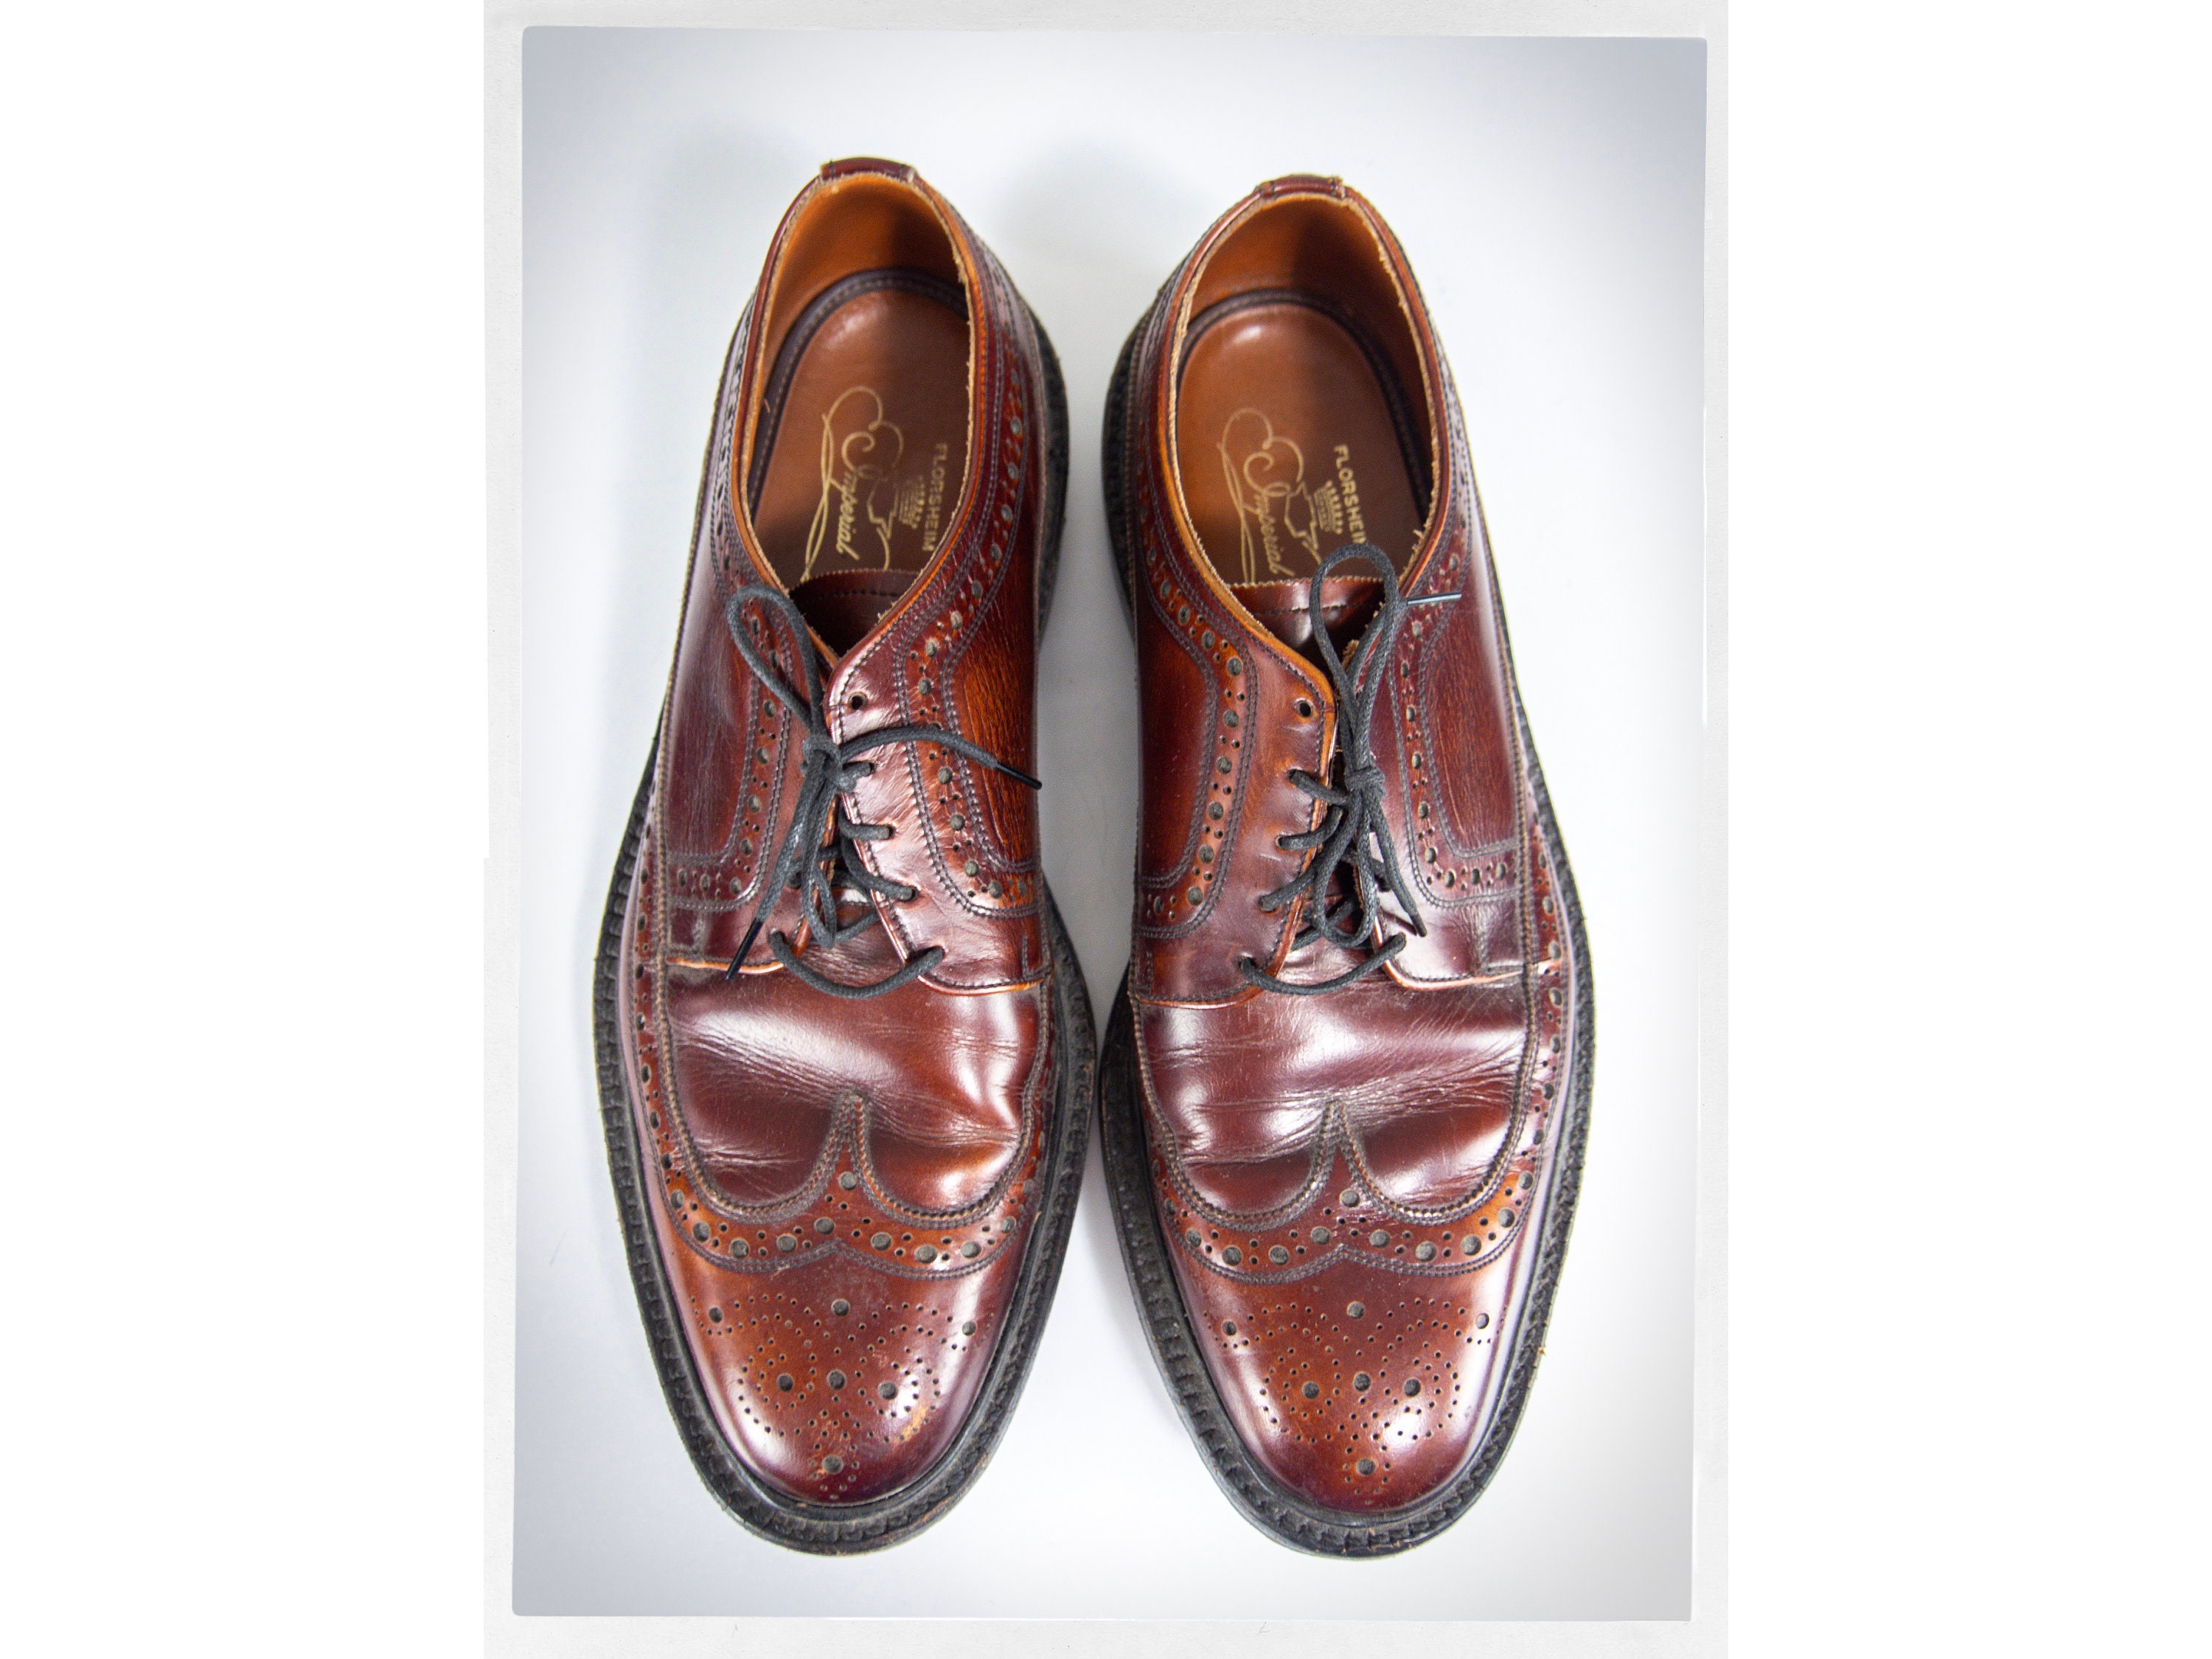 Dapperman Men's Wingtip Lace Up Oxfords Loafers